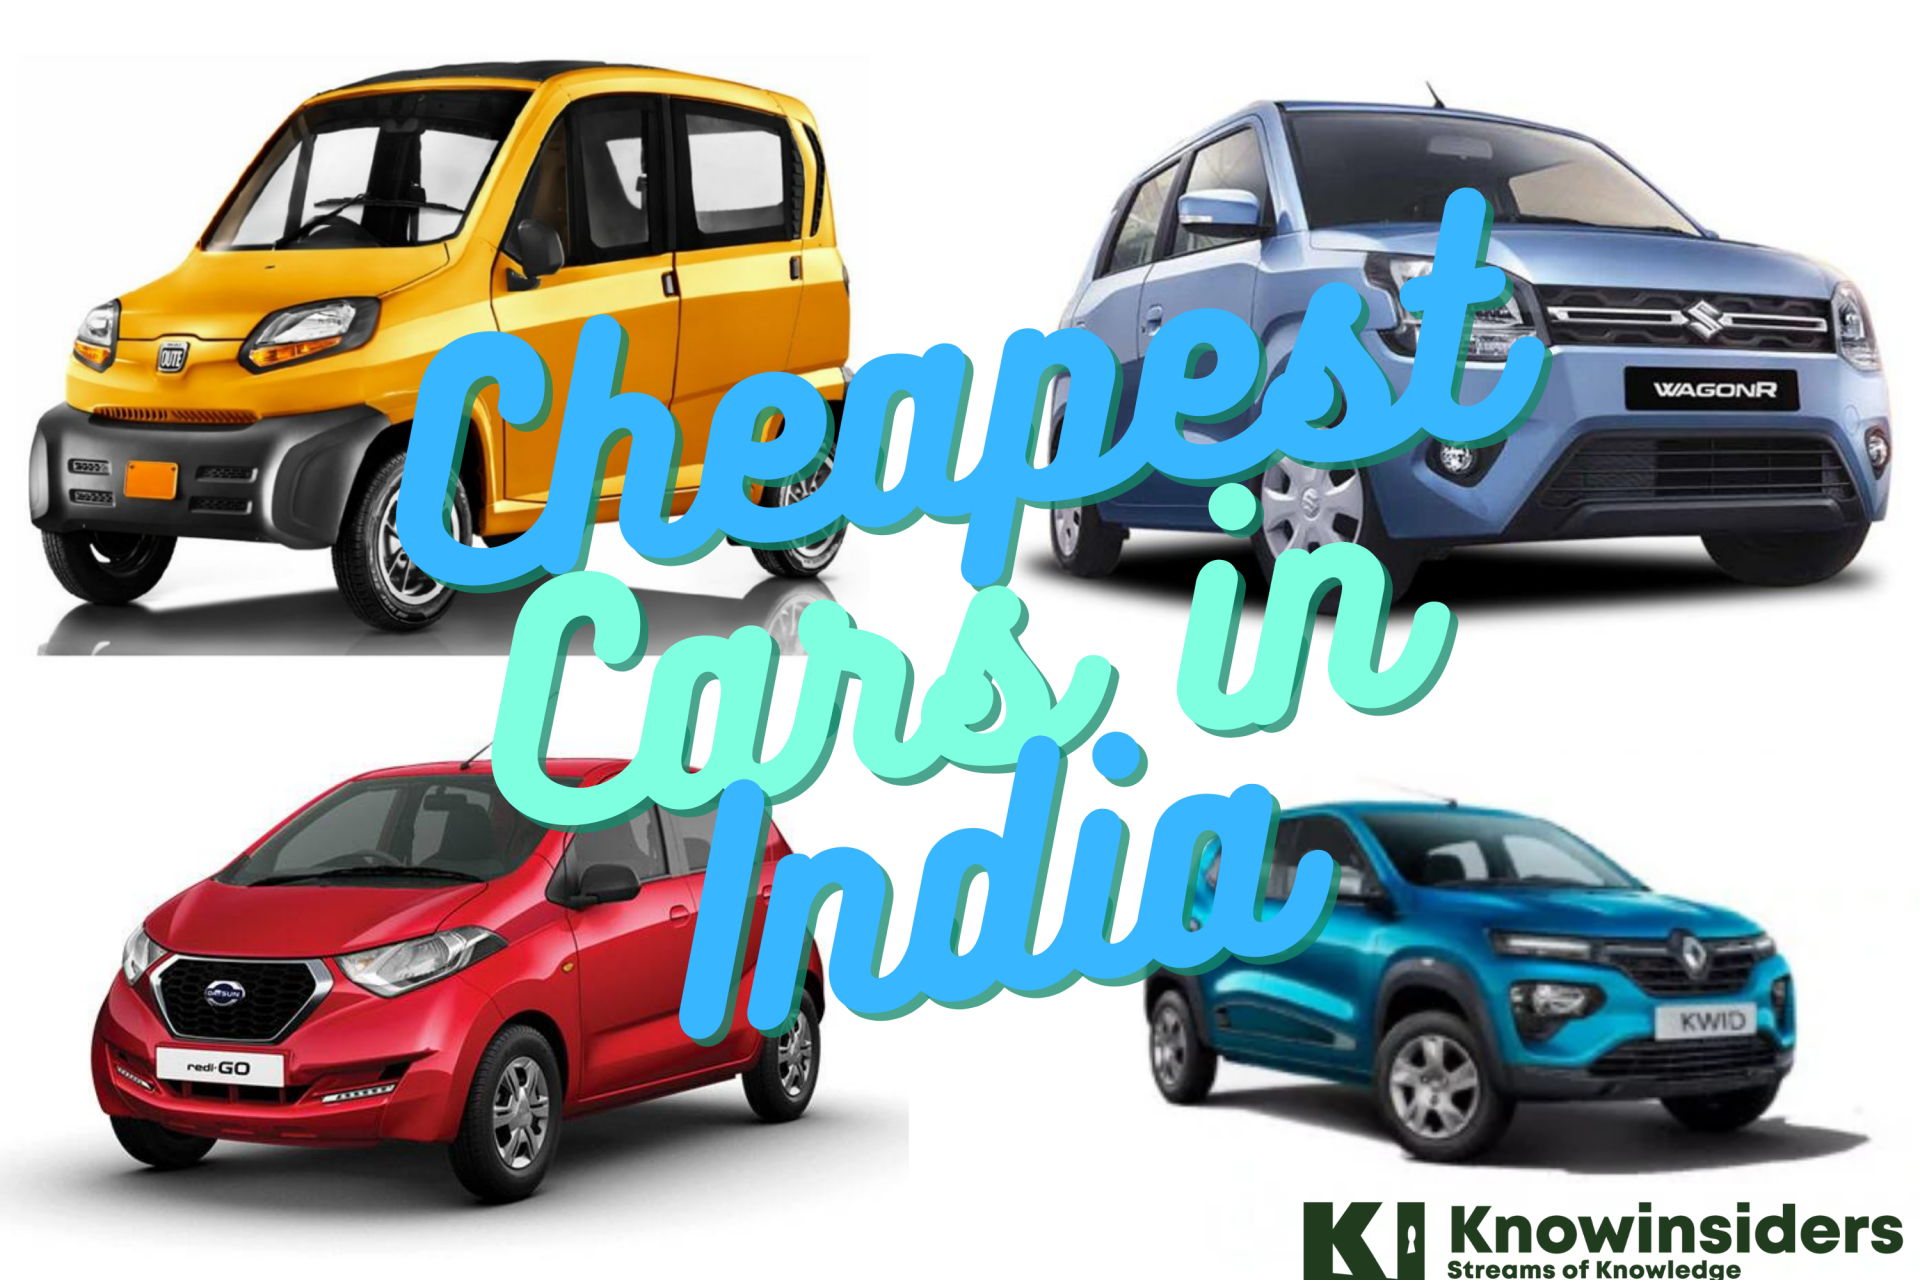 Top 15 Cars - Cheapest in India